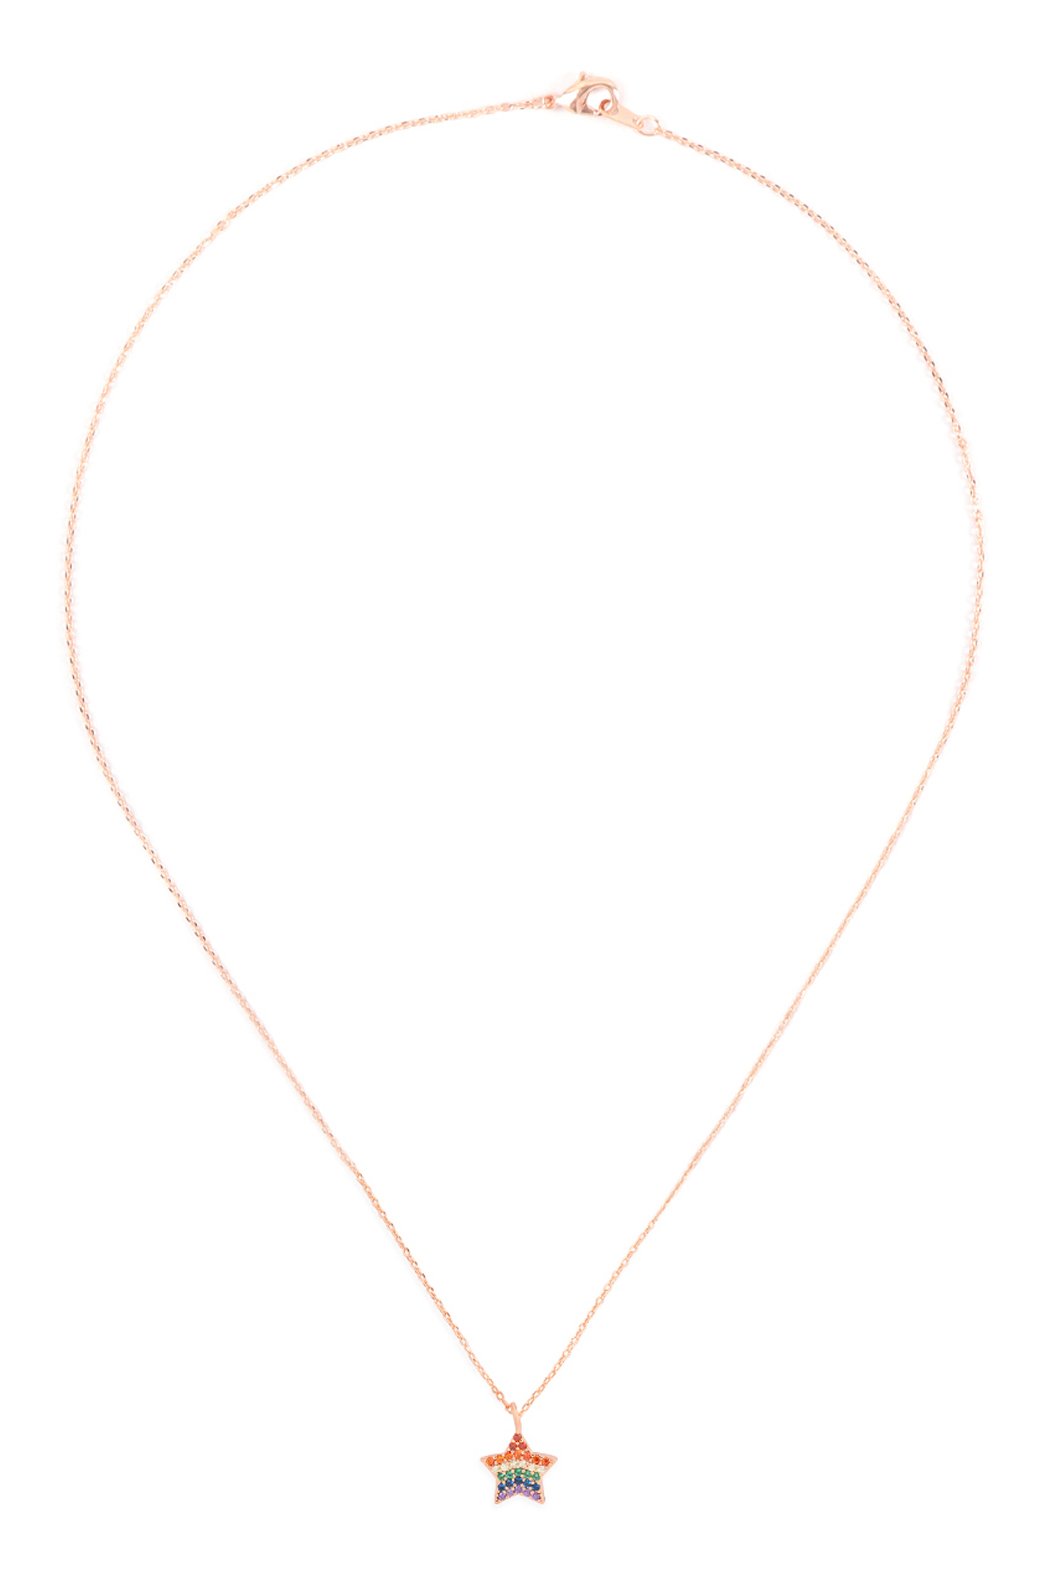 Hdnd2n203 - Star Zirconia Pendant Necklace - LOLA LUXE